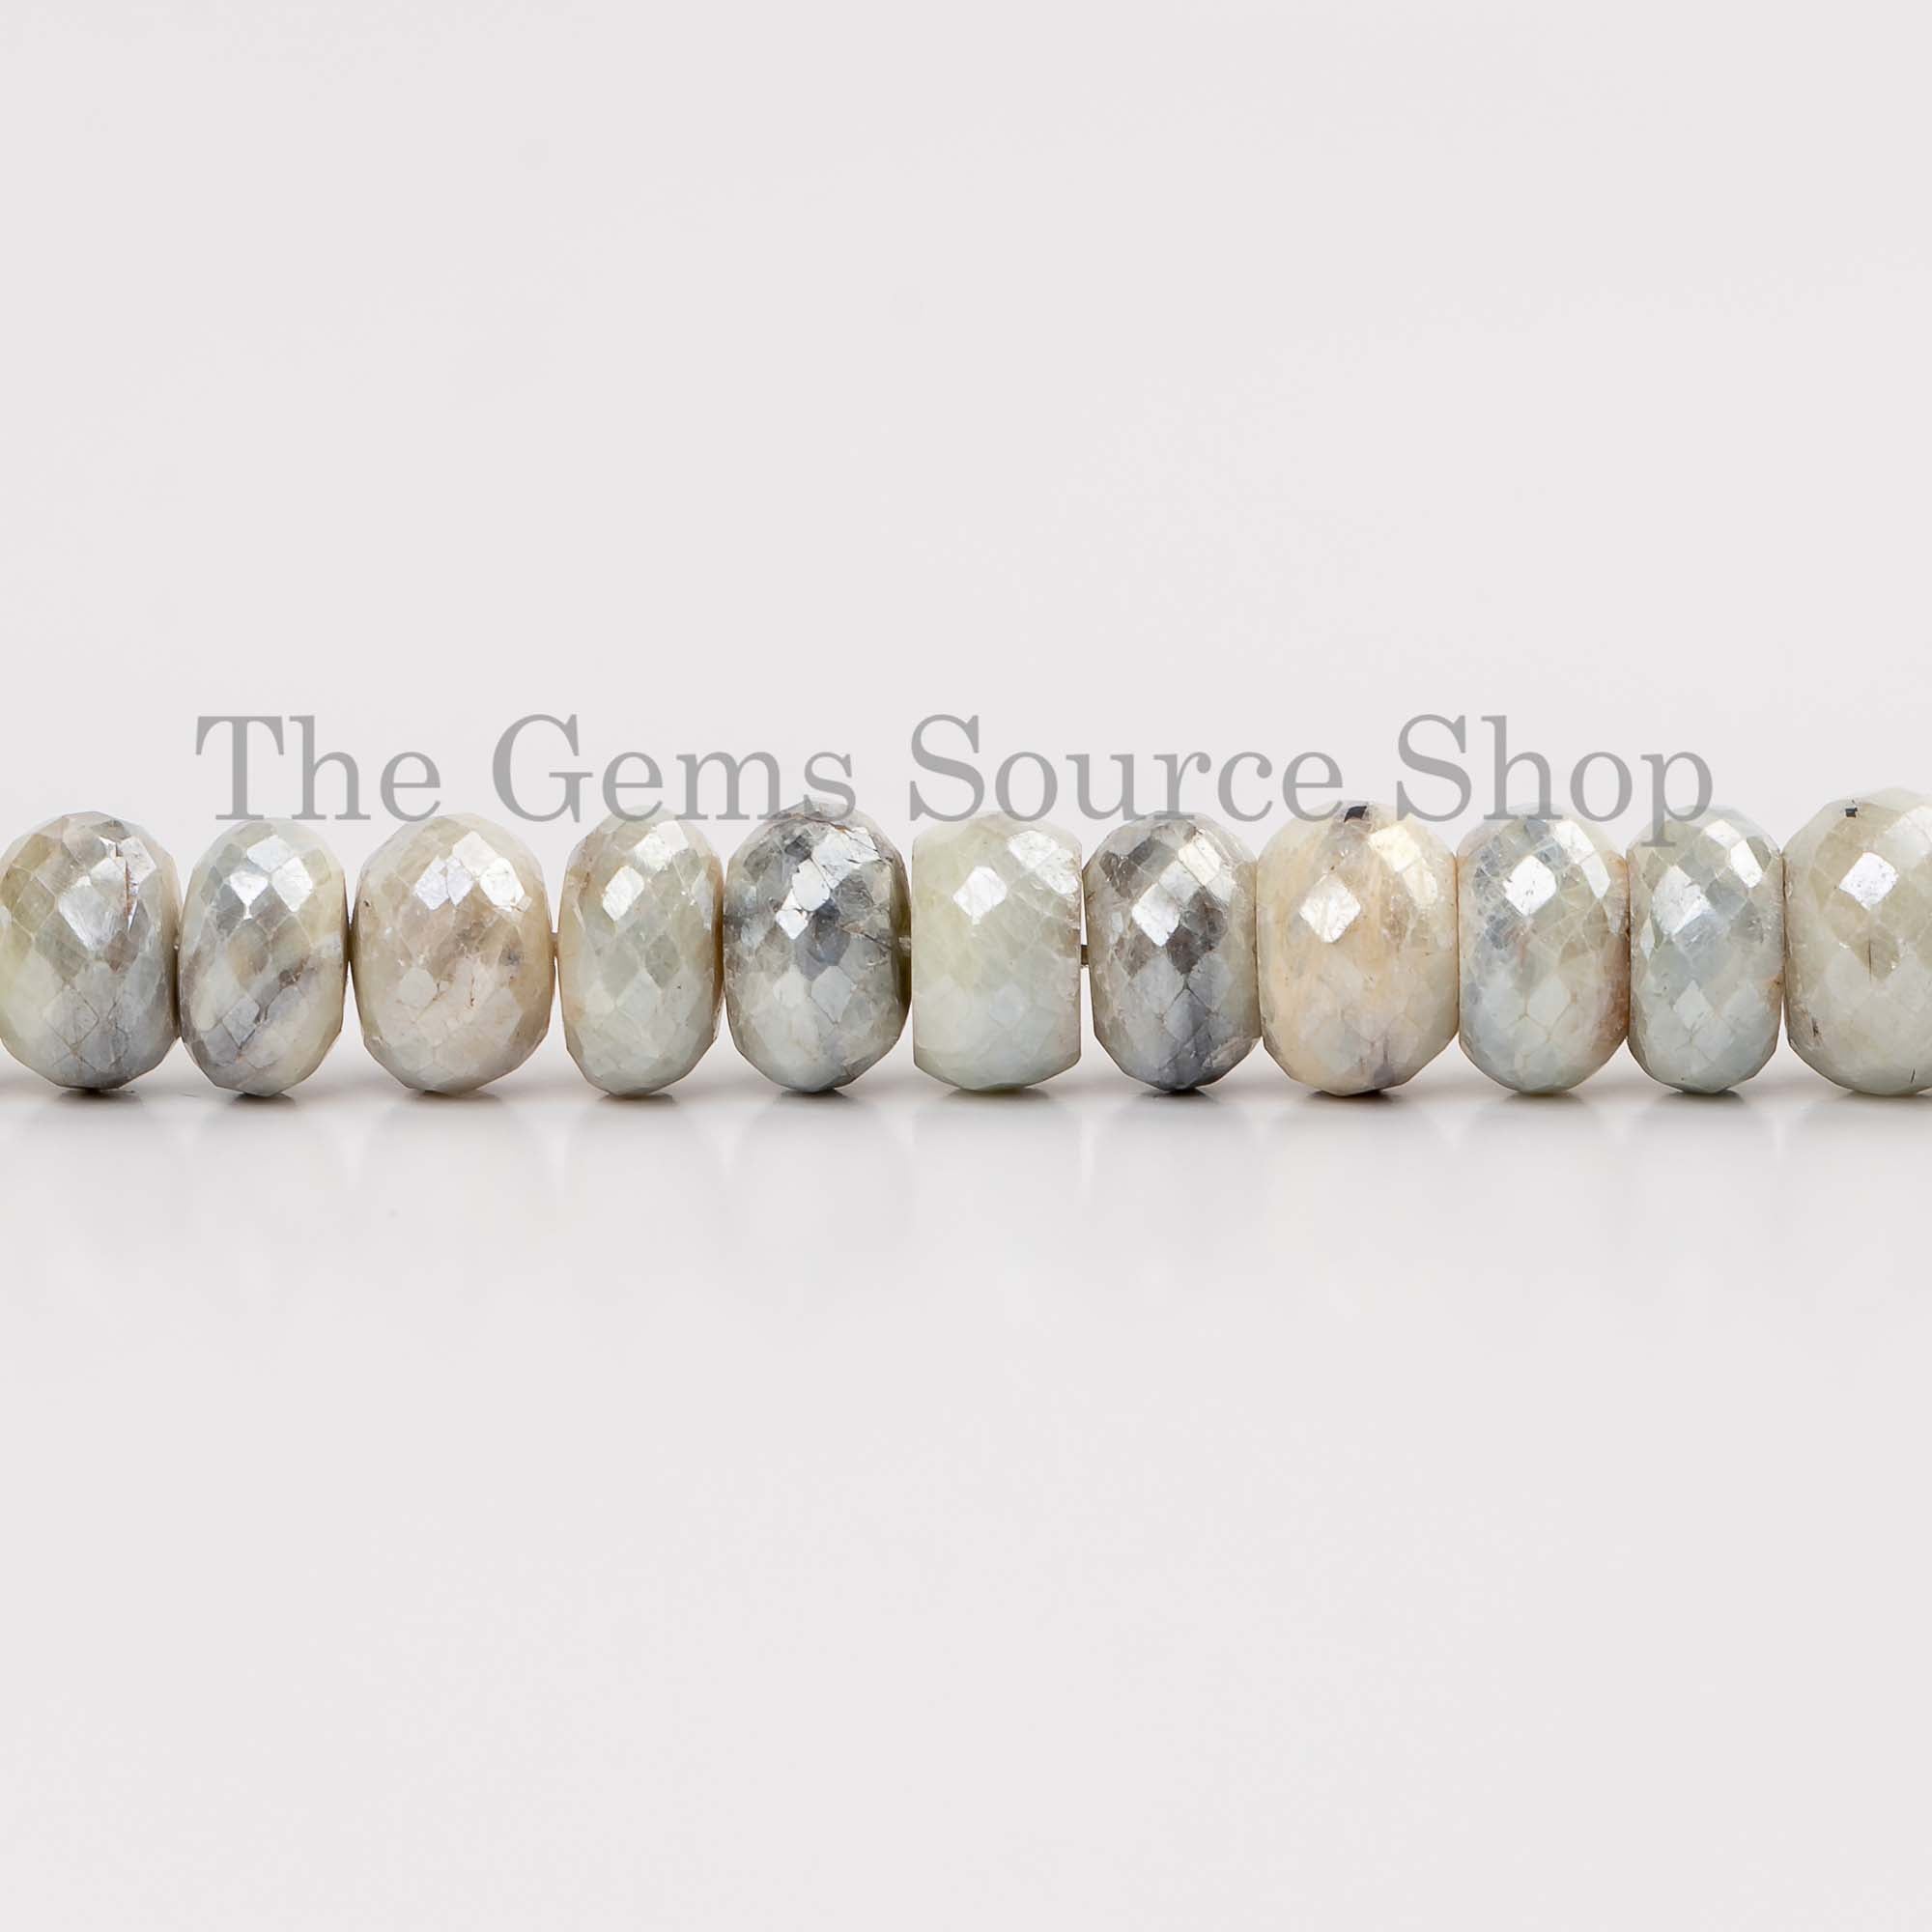 Silverite Coated Sapphire Beads, Coated Sapphire Faceted Beads, Sapphire Rondelle Shape Beads